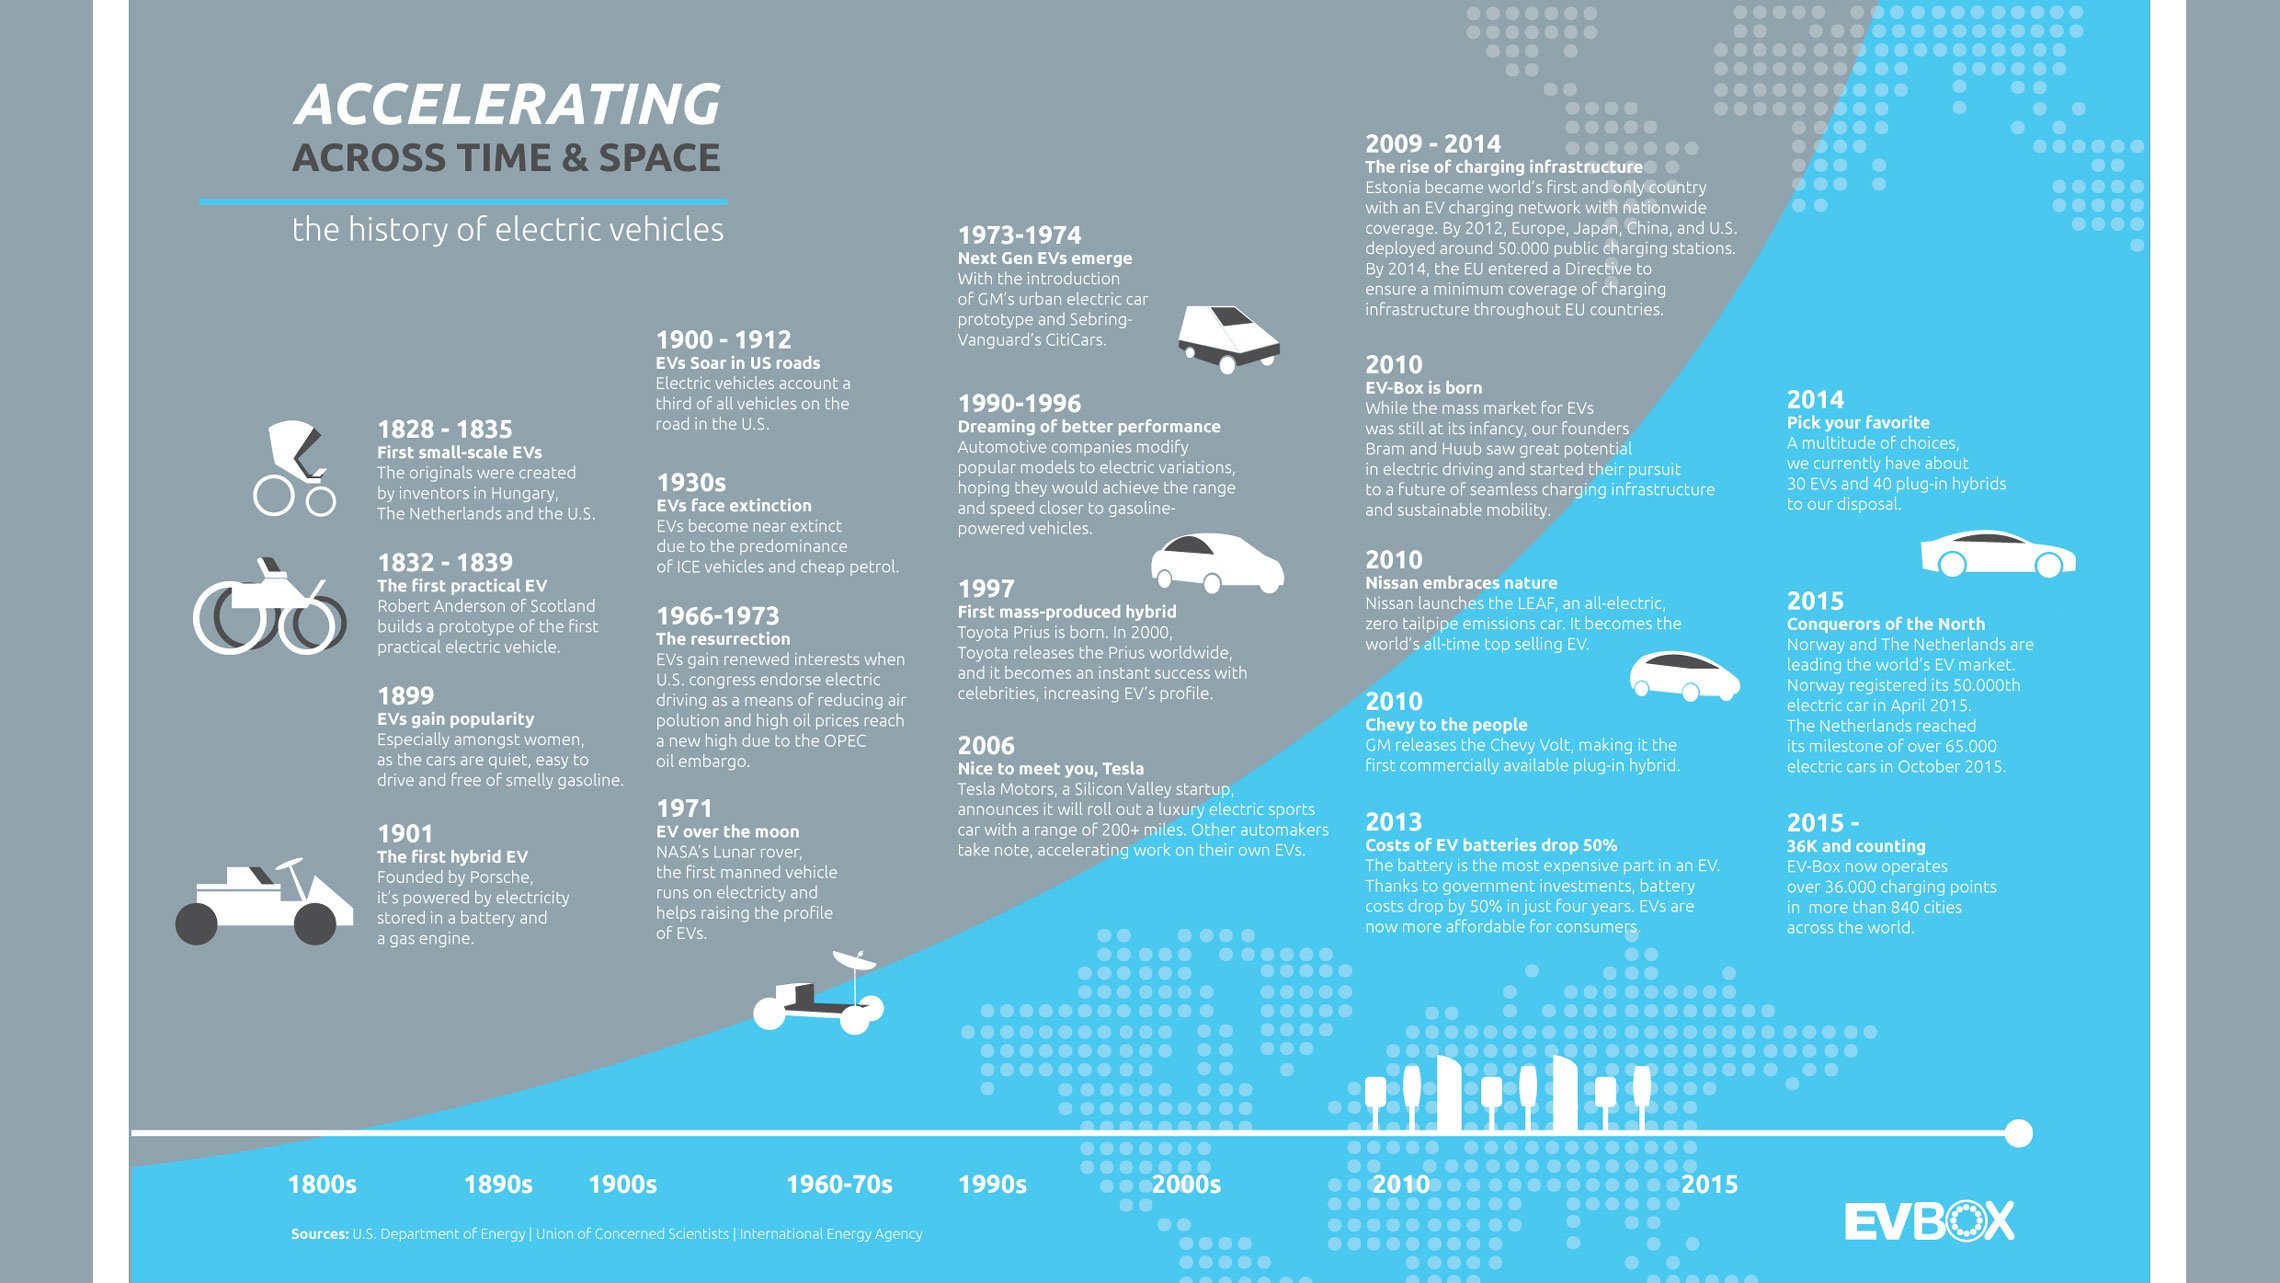 An infographic showcasing the history of the electric vehicle from the 1830s until today.